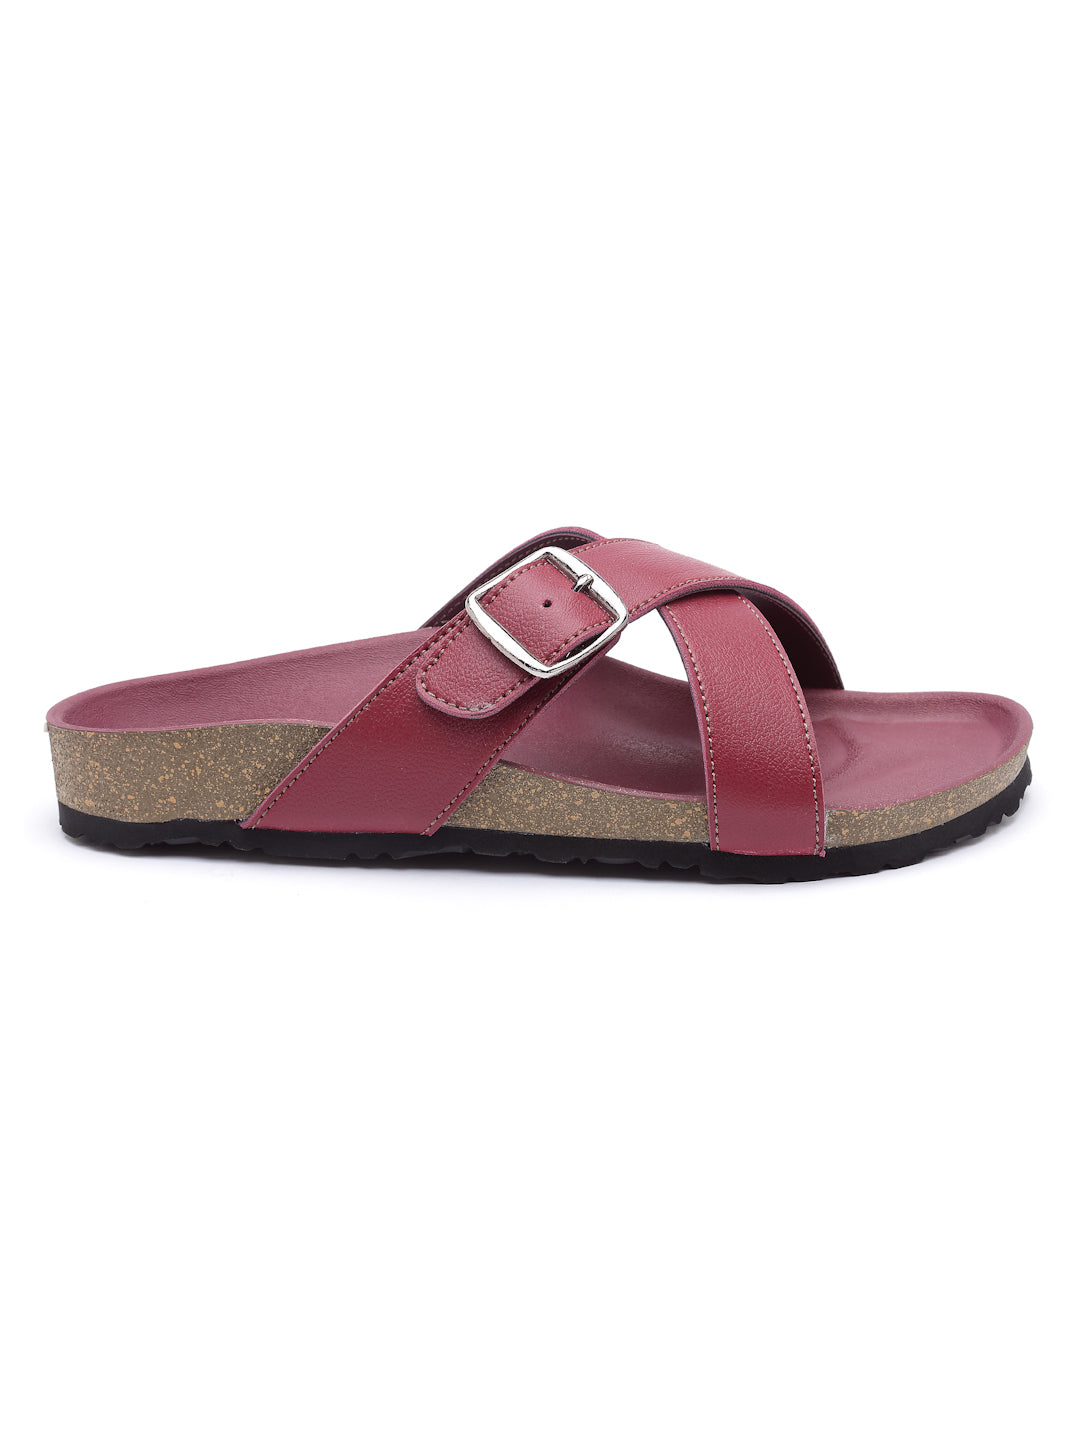 Women's Stylish Maroon Synthetic Leather Casual Sandal